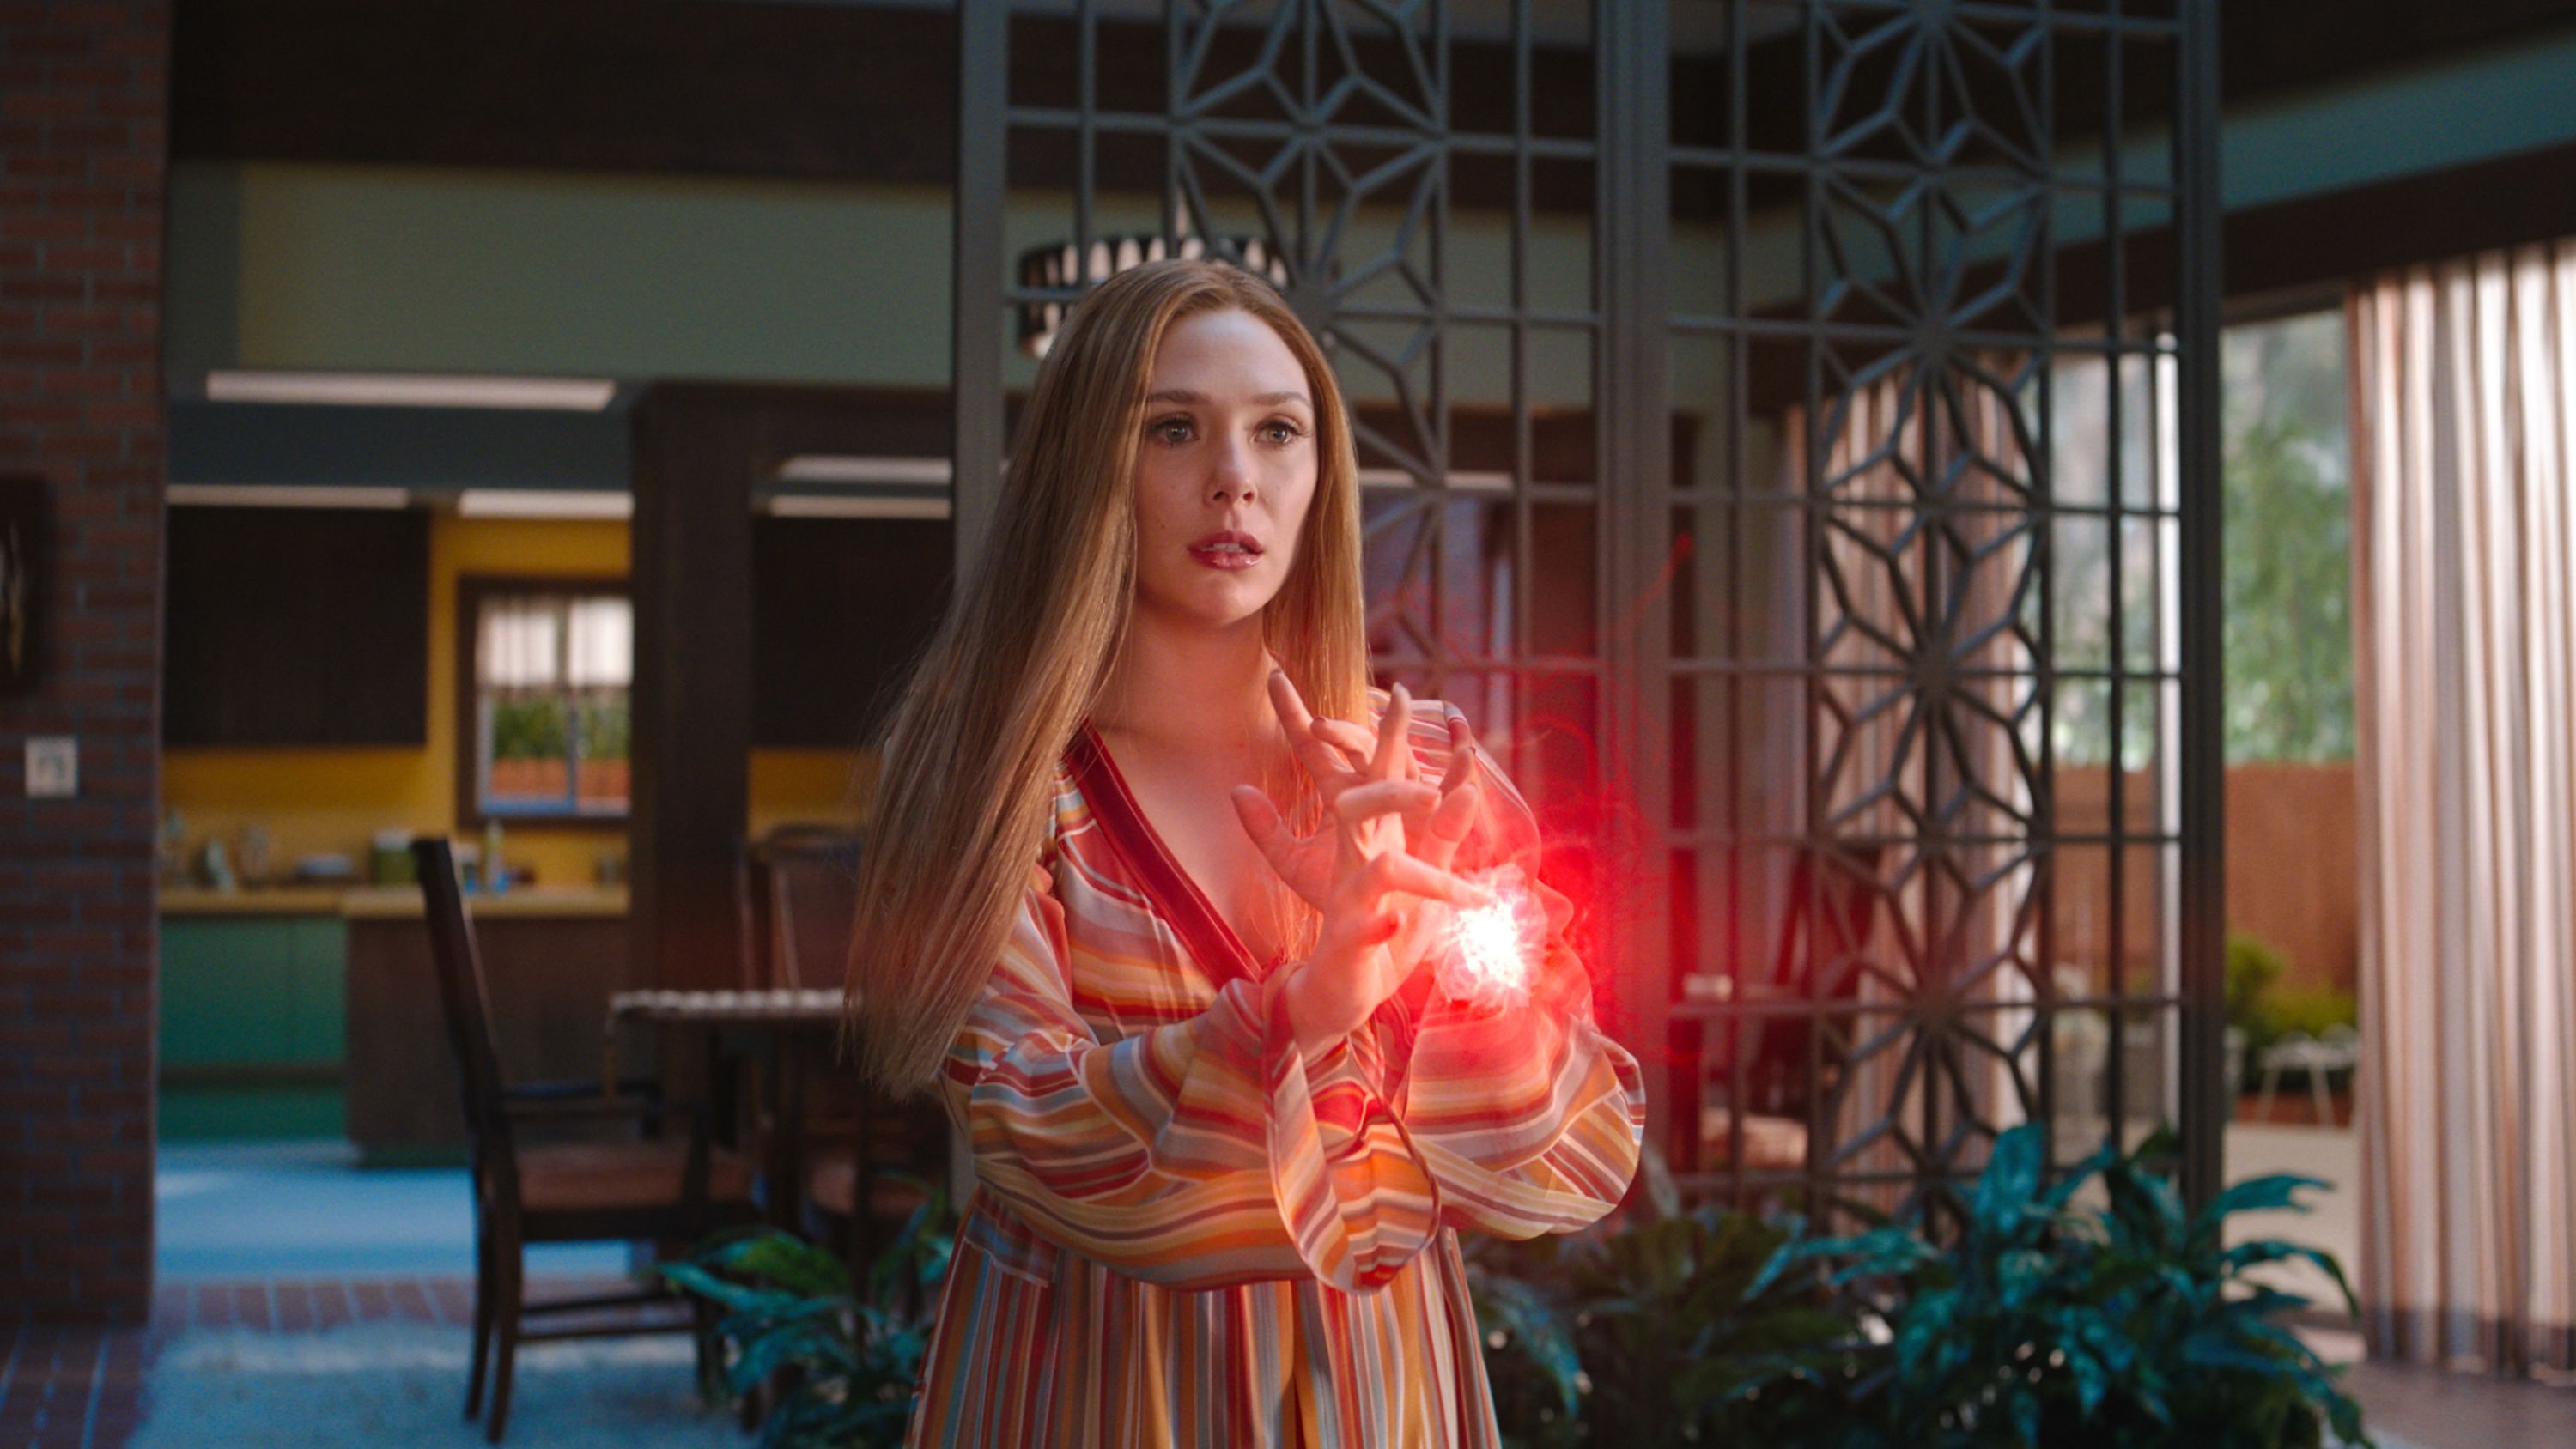 Marvel's Wanda Maximoff has a future, but fate of 'WandaVision' unclear after March 5 finale